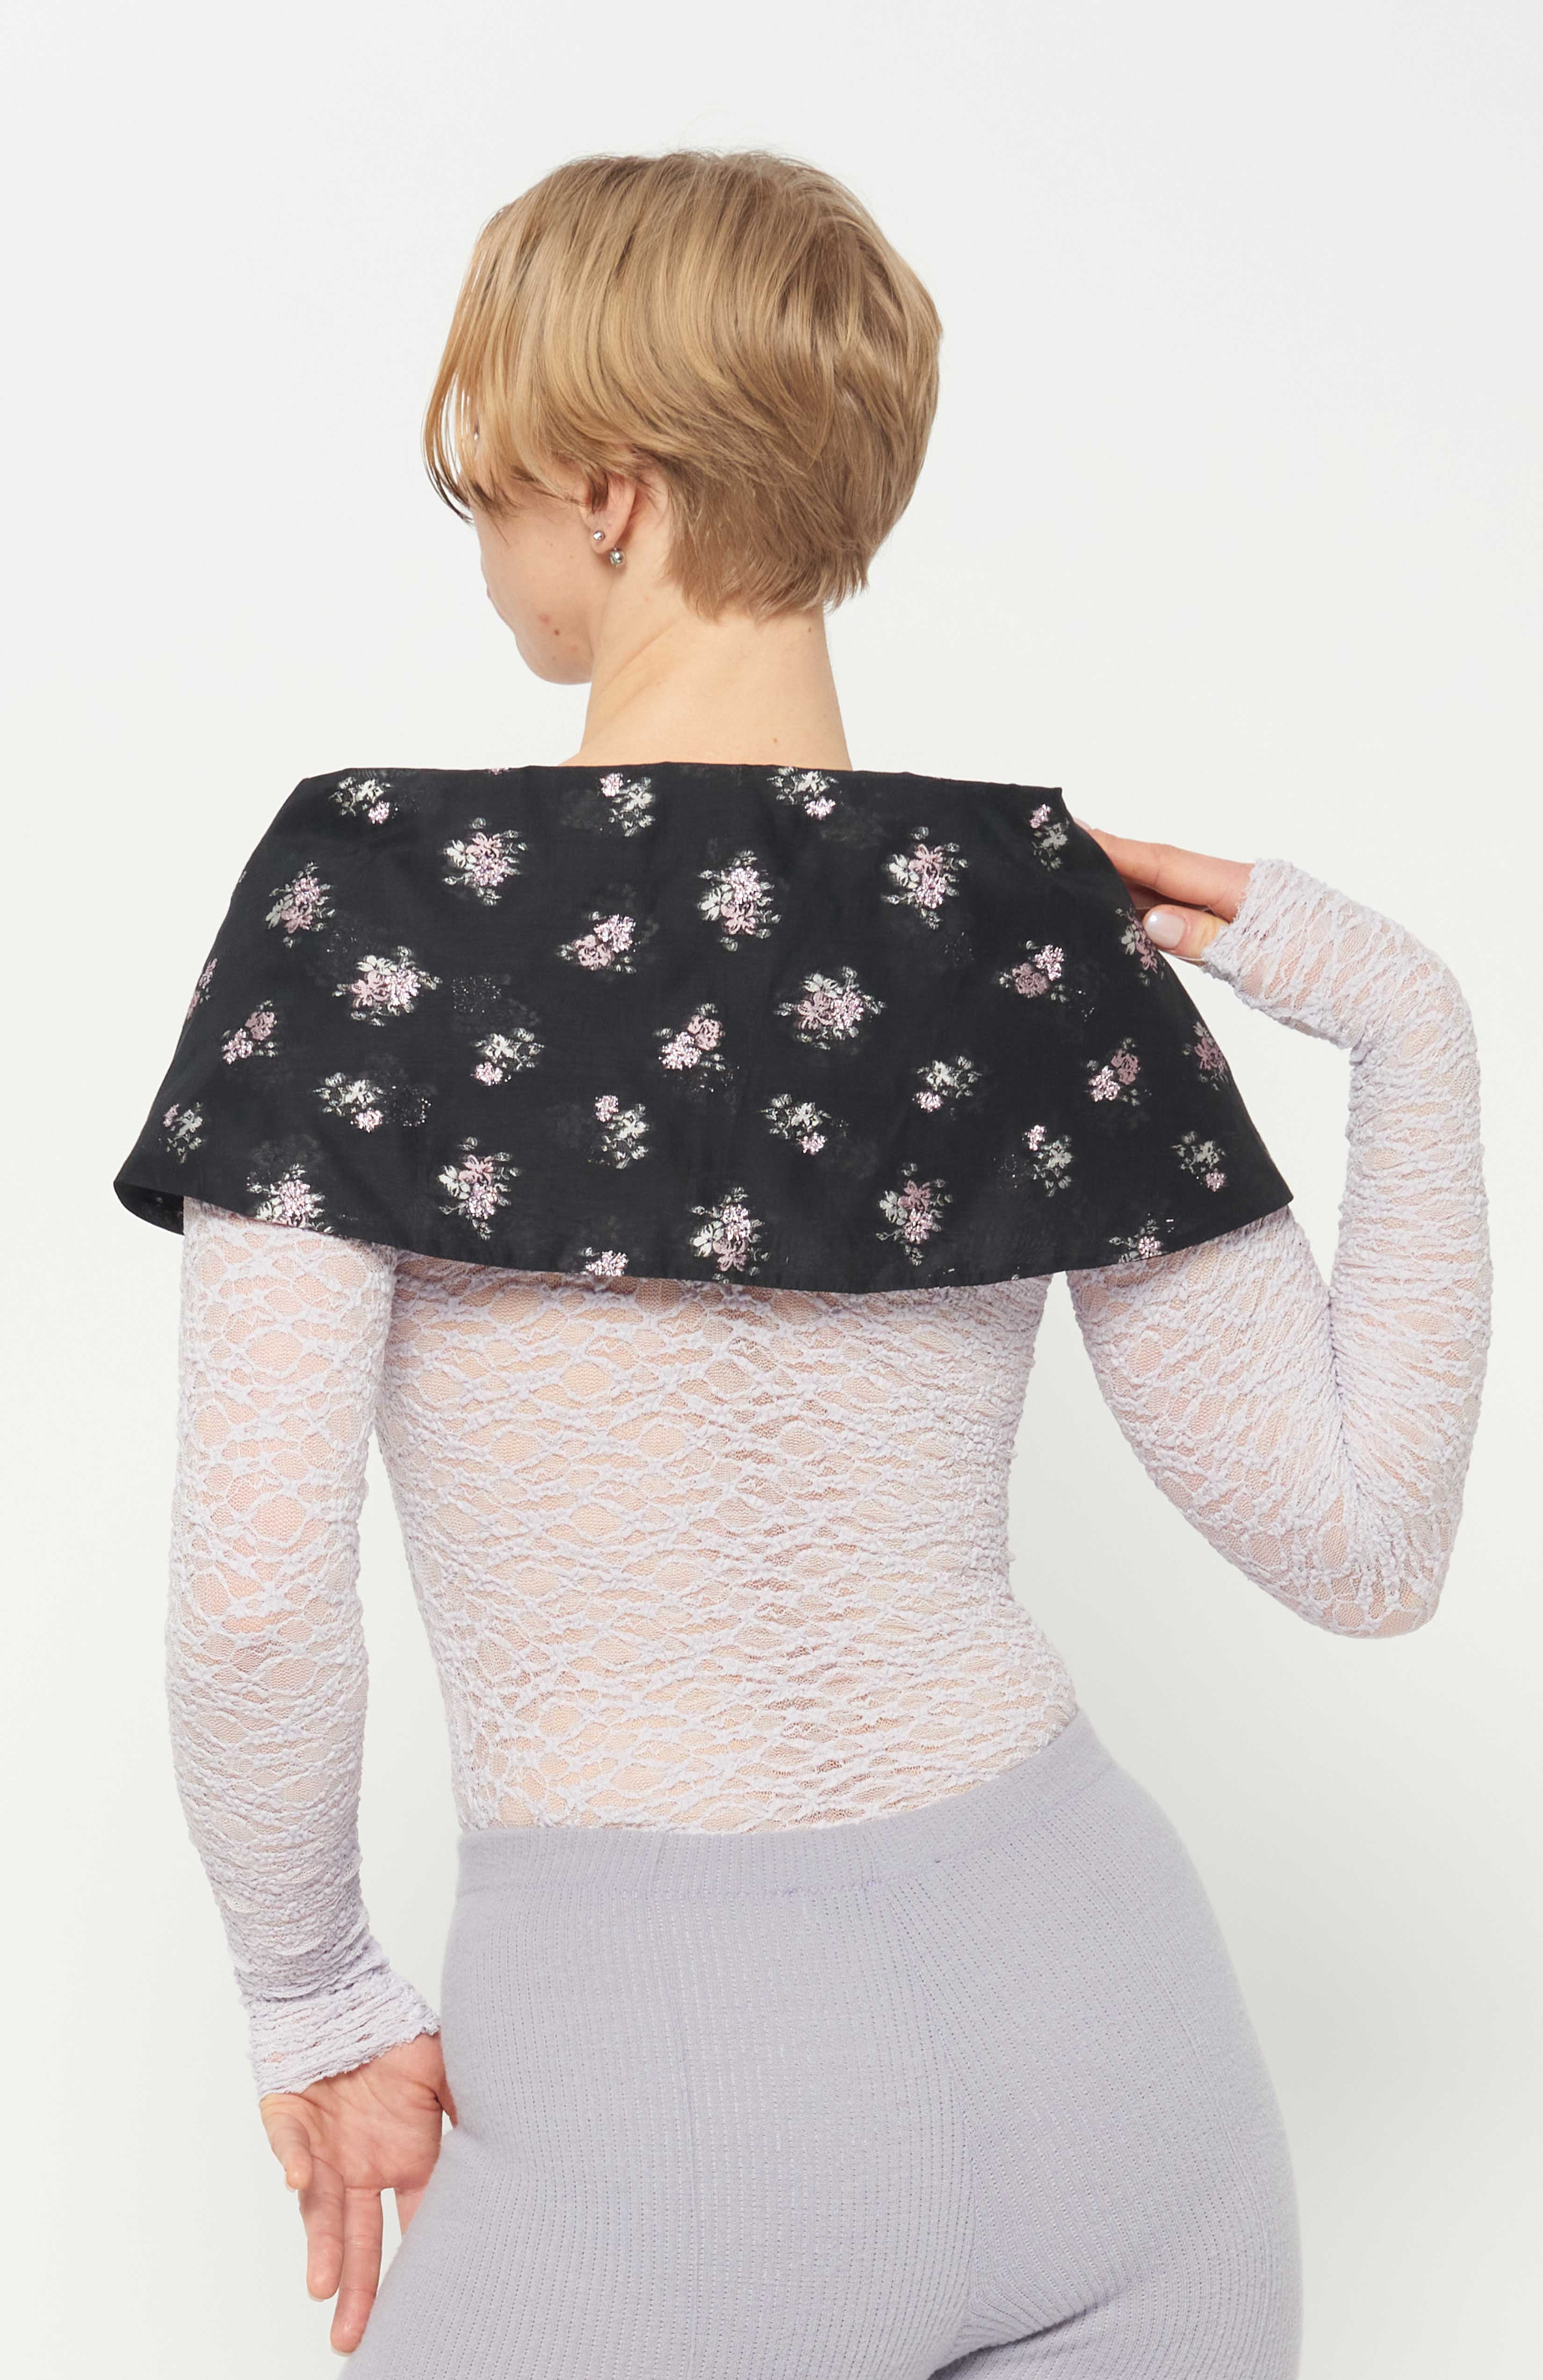 Maroske Peech, A stylish cape-like black floral bow collar. Sits on your shoulders to frame the neck and face. Fashioned in a light weight woven jacquard with a flattering detailed pink metallic floral. A perfect way to create a dramatic frame-like allure to elevate any outfit when your presence is required.